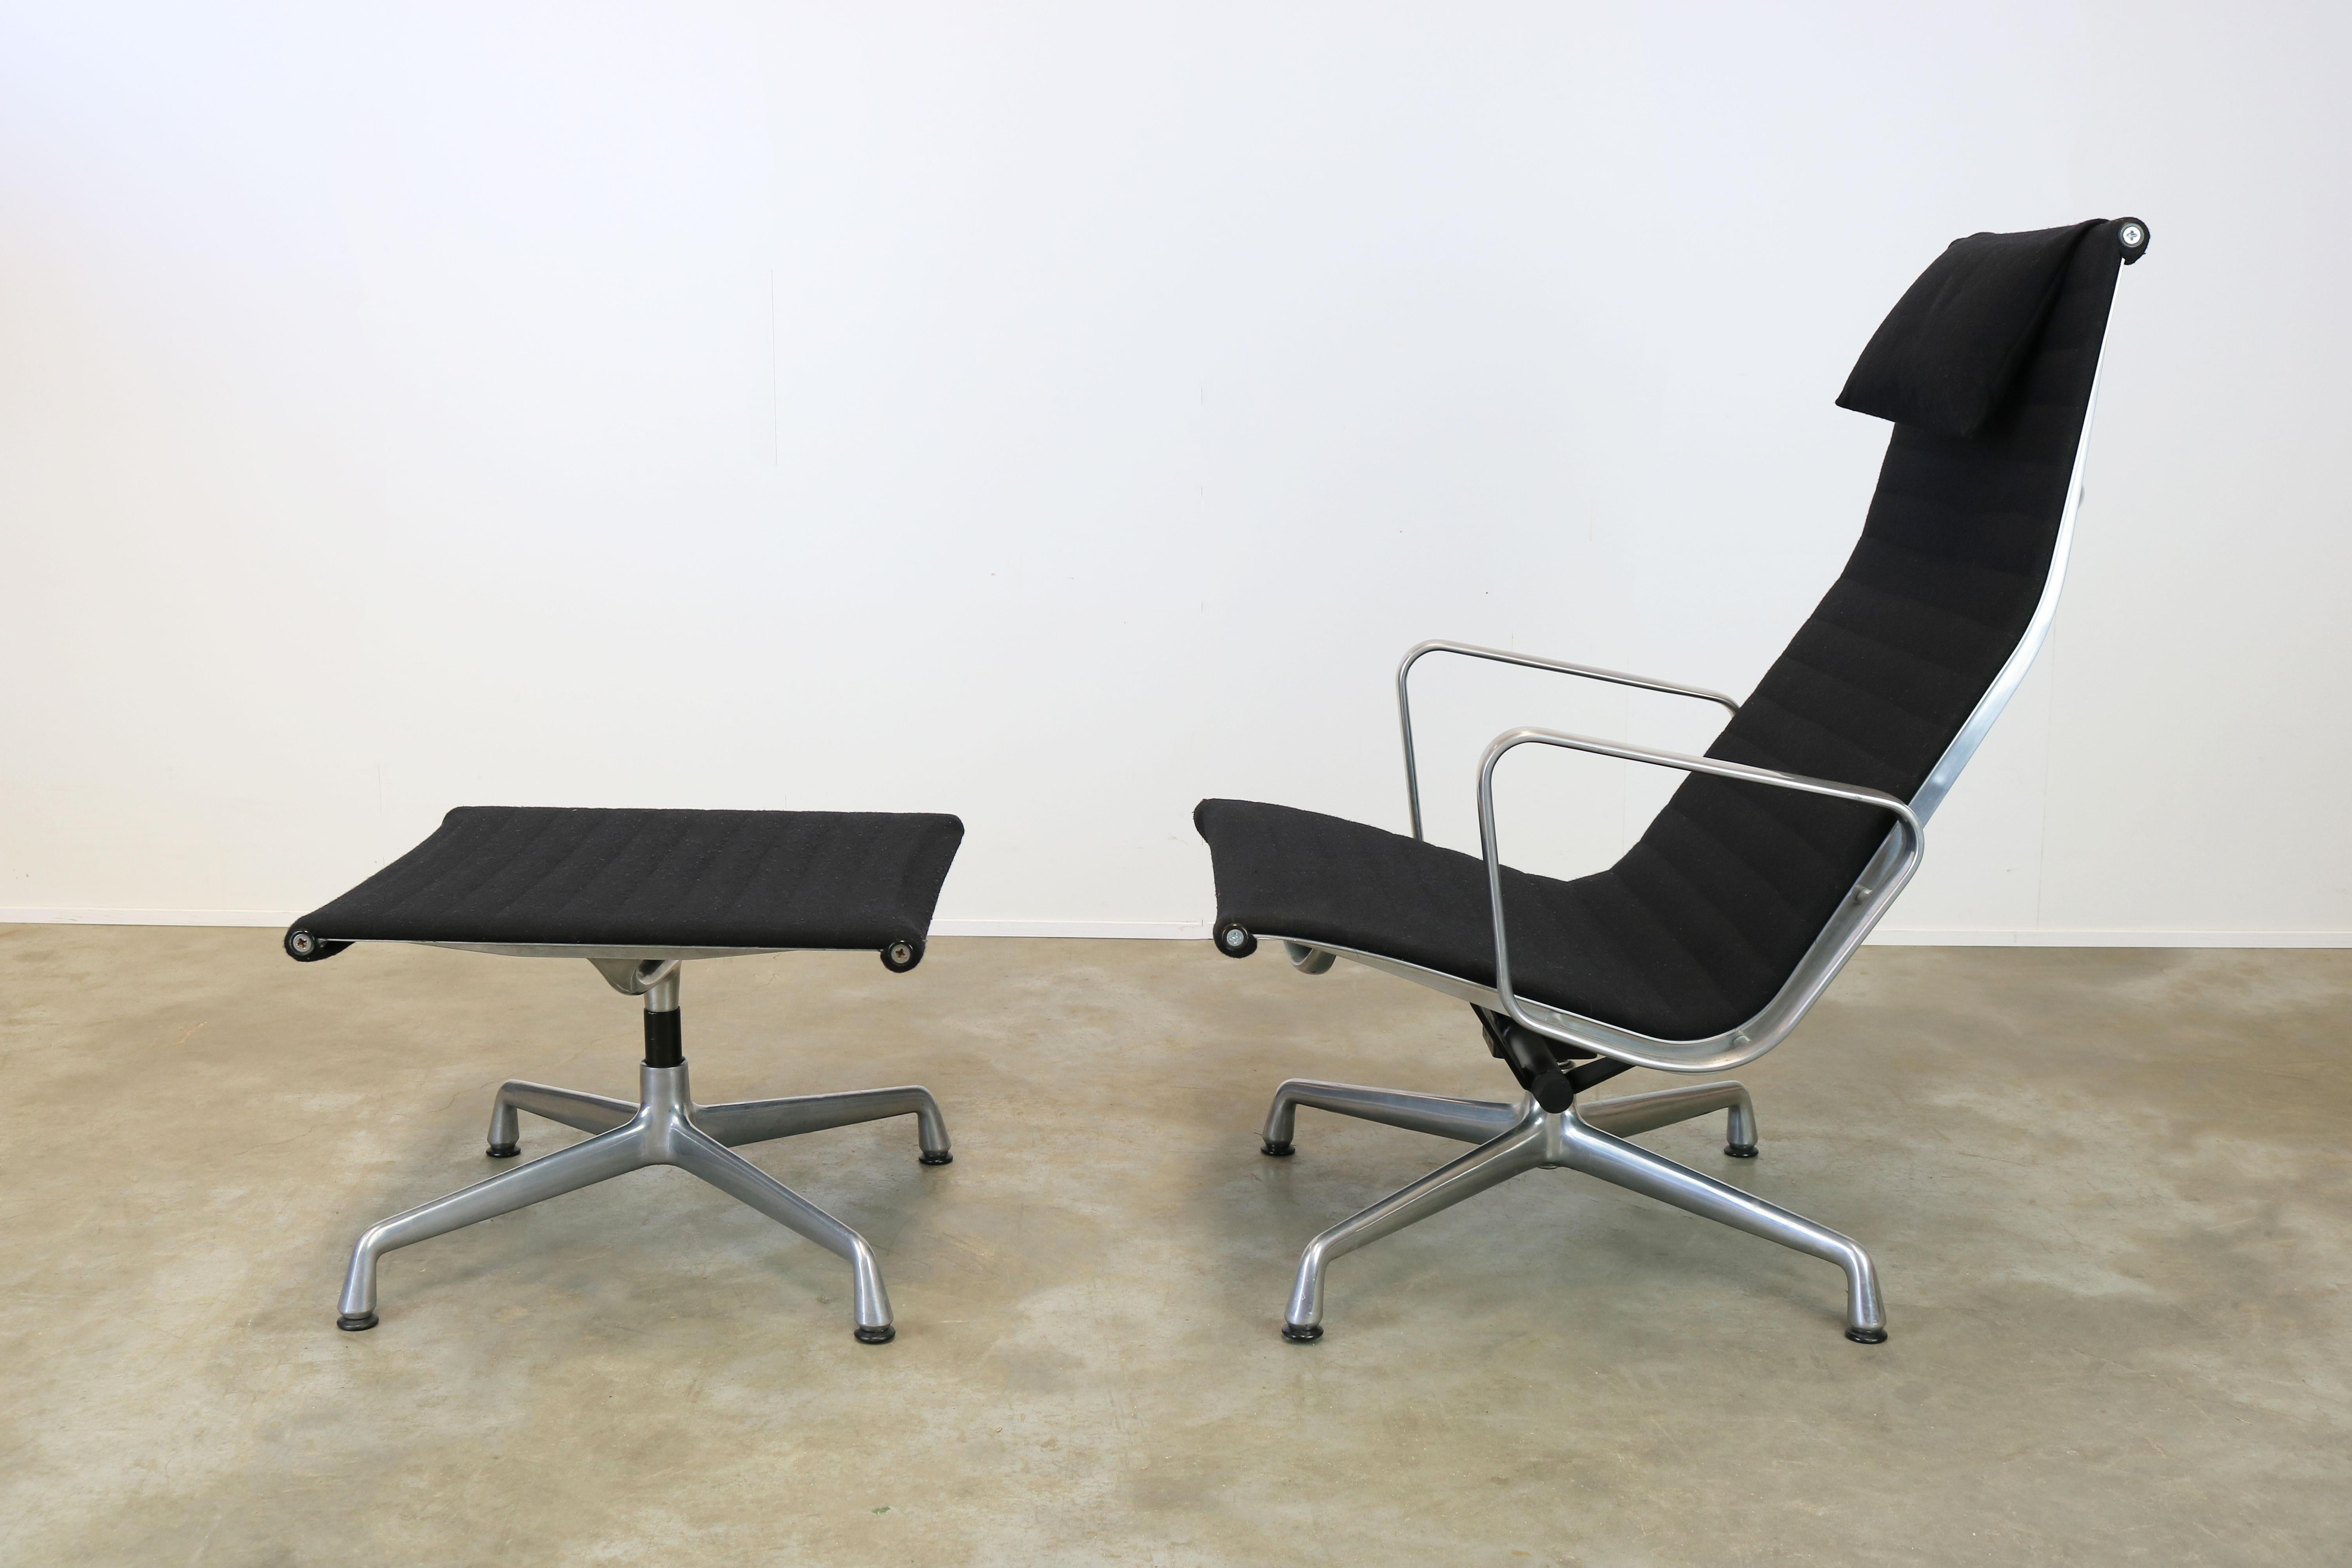 Wonderfull design lounge chair and ottoman model: EA124 + EA125 by Charles & Ray Eames produced by Herman Miller, 1970s. The EA124 and EA125 is the purist lounge set from the famous Aluminum Group series. The high backrest with pillow and the body